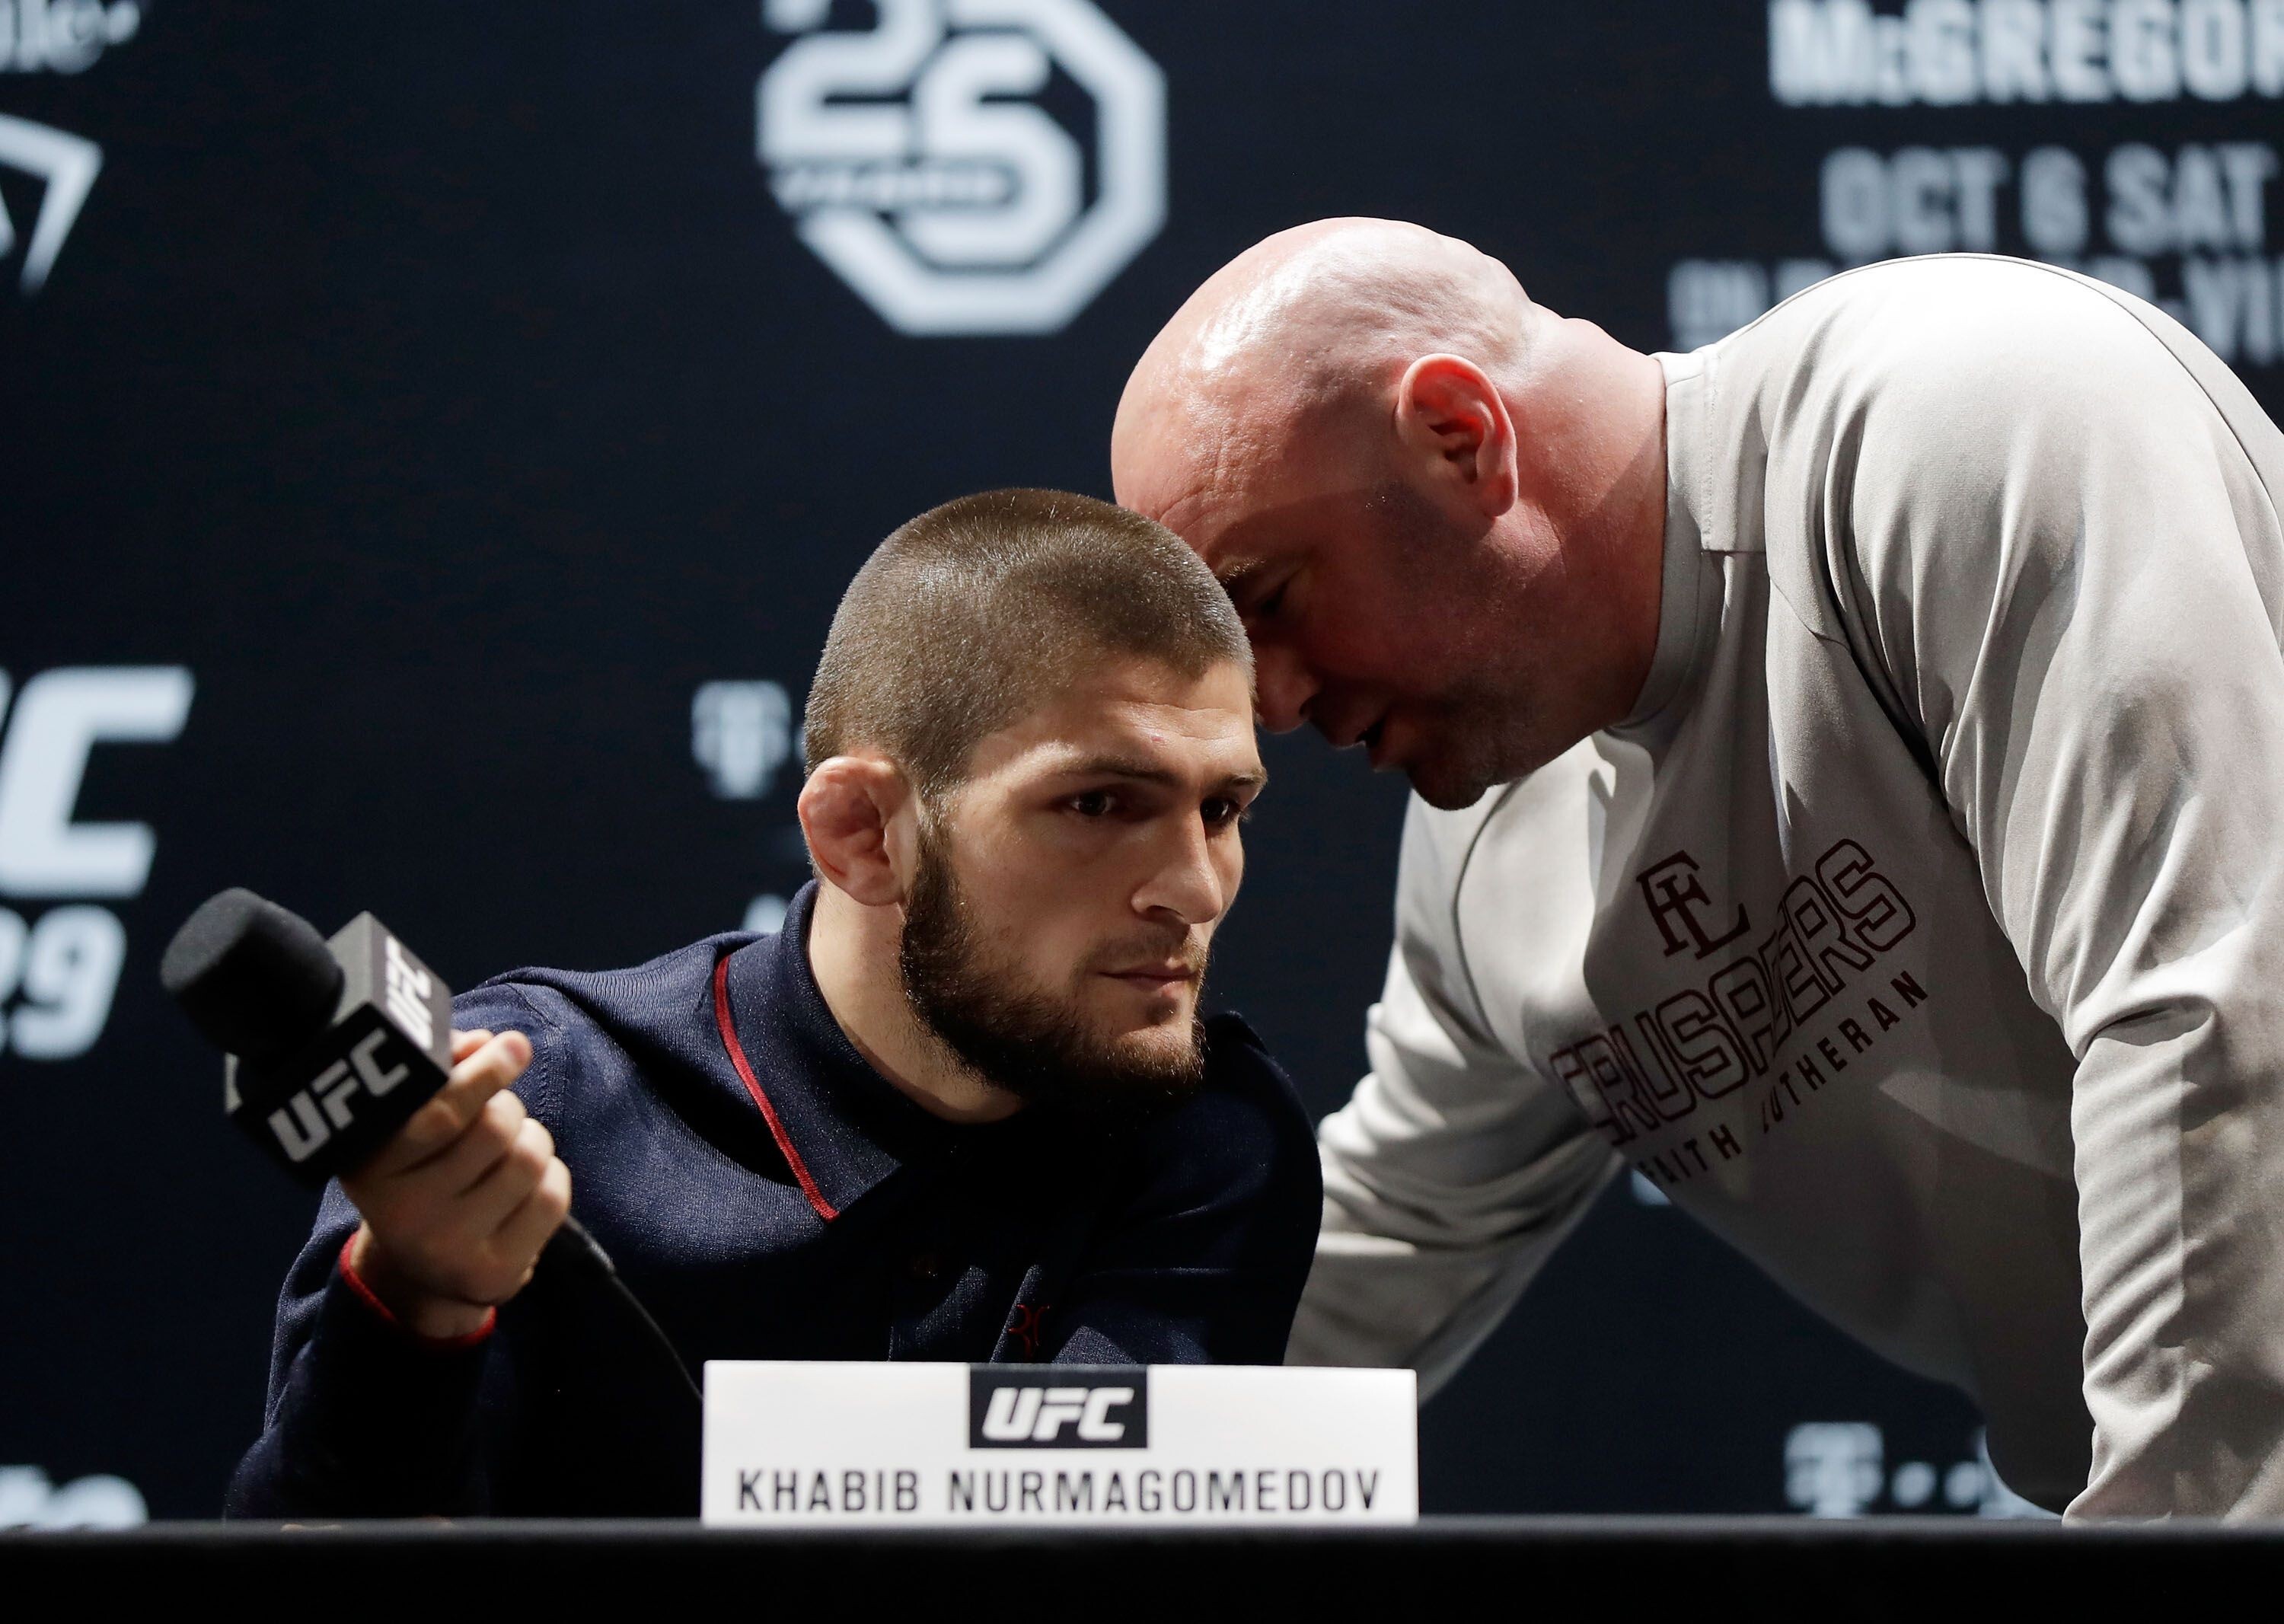 UFC president Dana White speaks with lightweight champion Khabib Nurmagomedov during a press conference for UFC 229. Photo: AFP